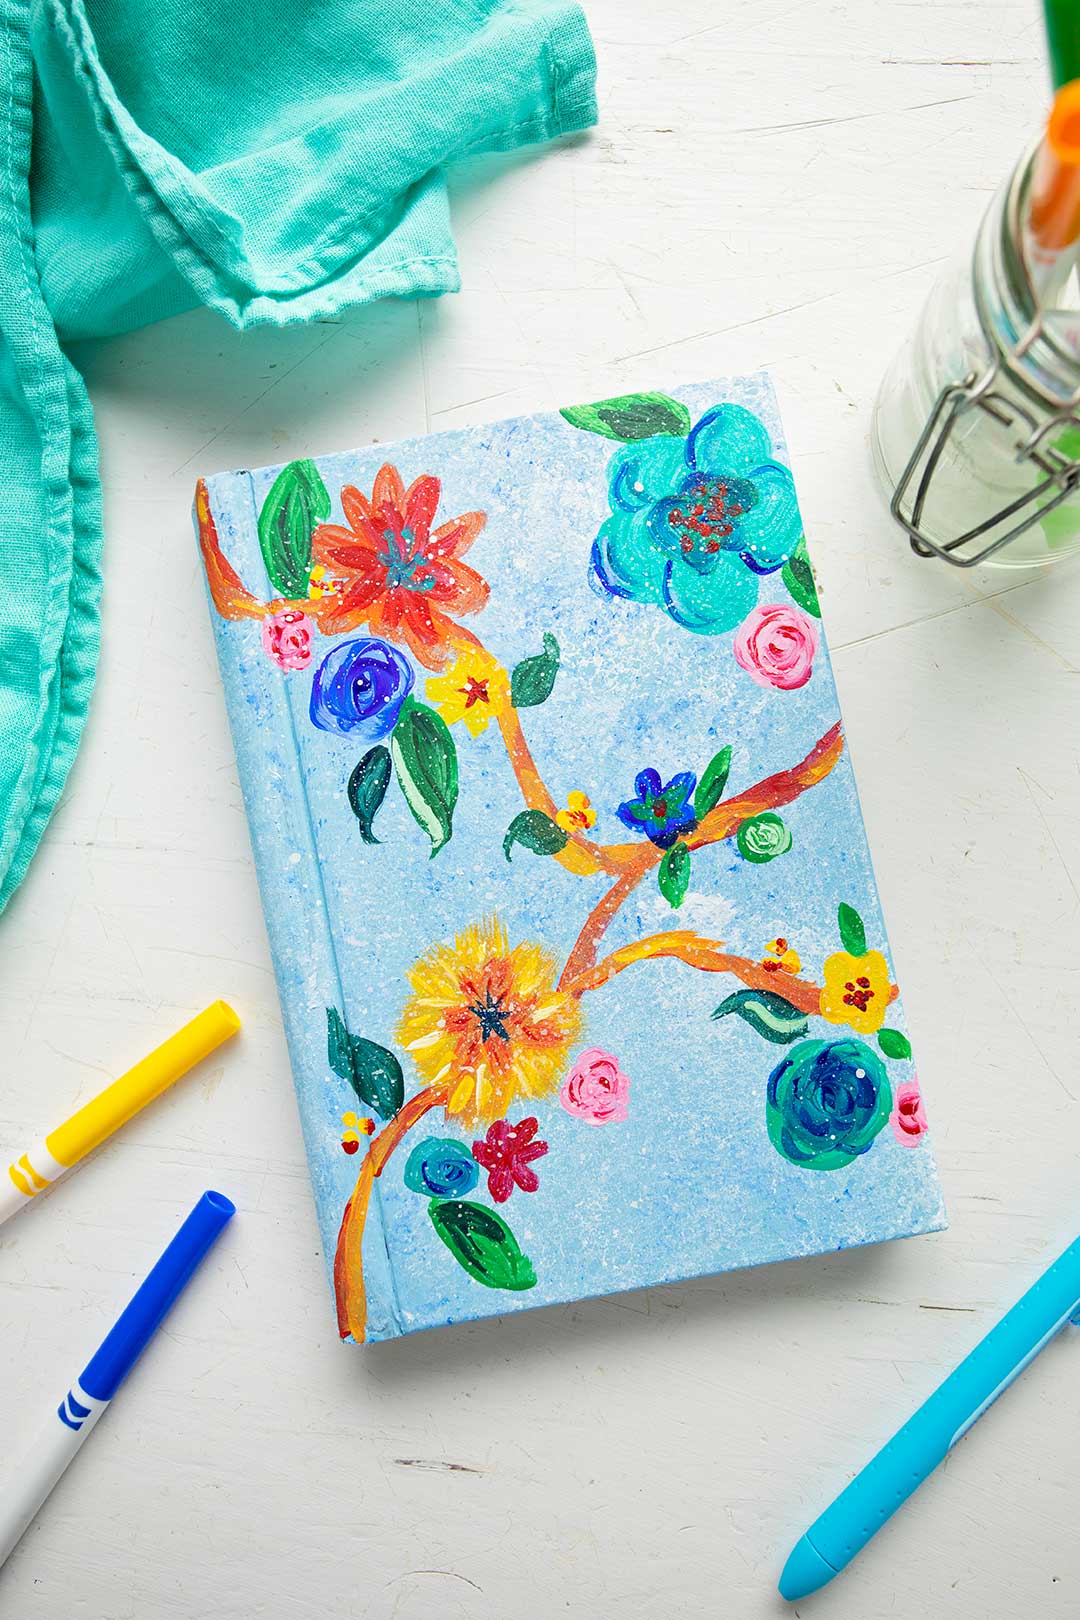 Painted book cover with brightly colored flowers and leaves. Teal linen and colored pens rest beside painted book cover.